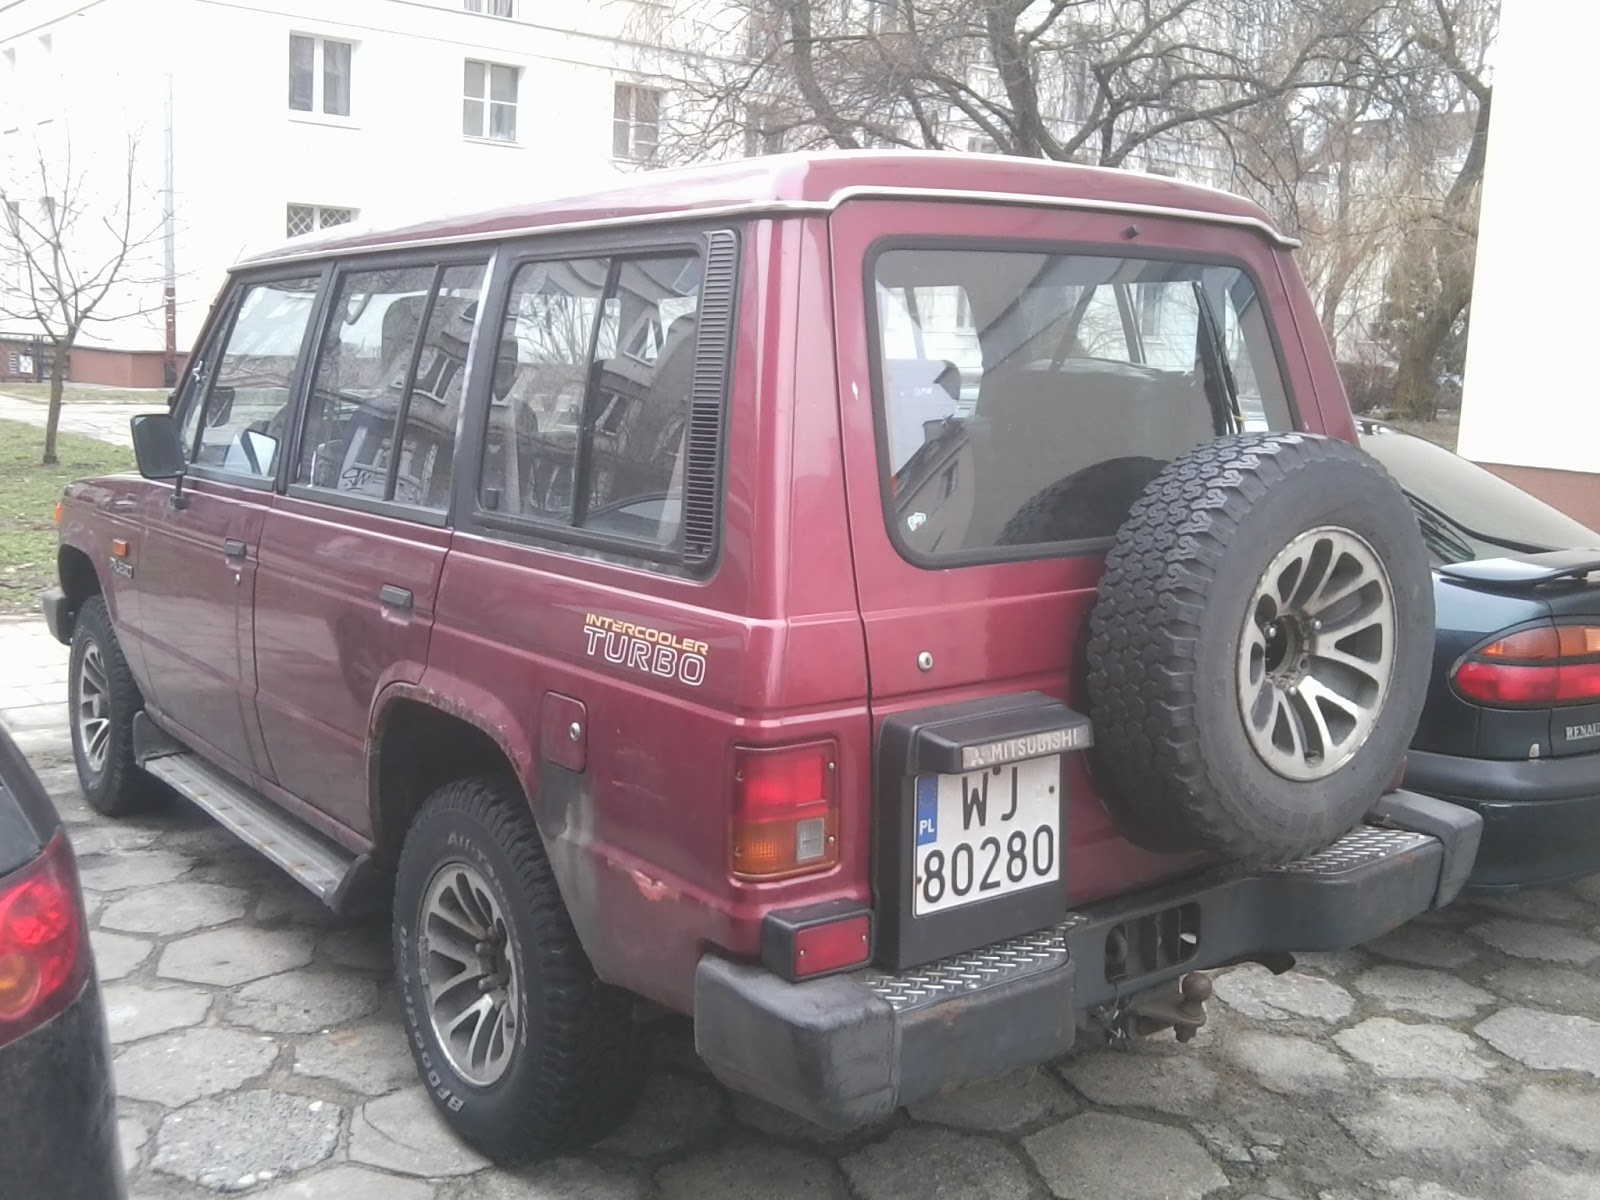 Old Parked Cars Warsaw Pajero Night 1 of 2 1983